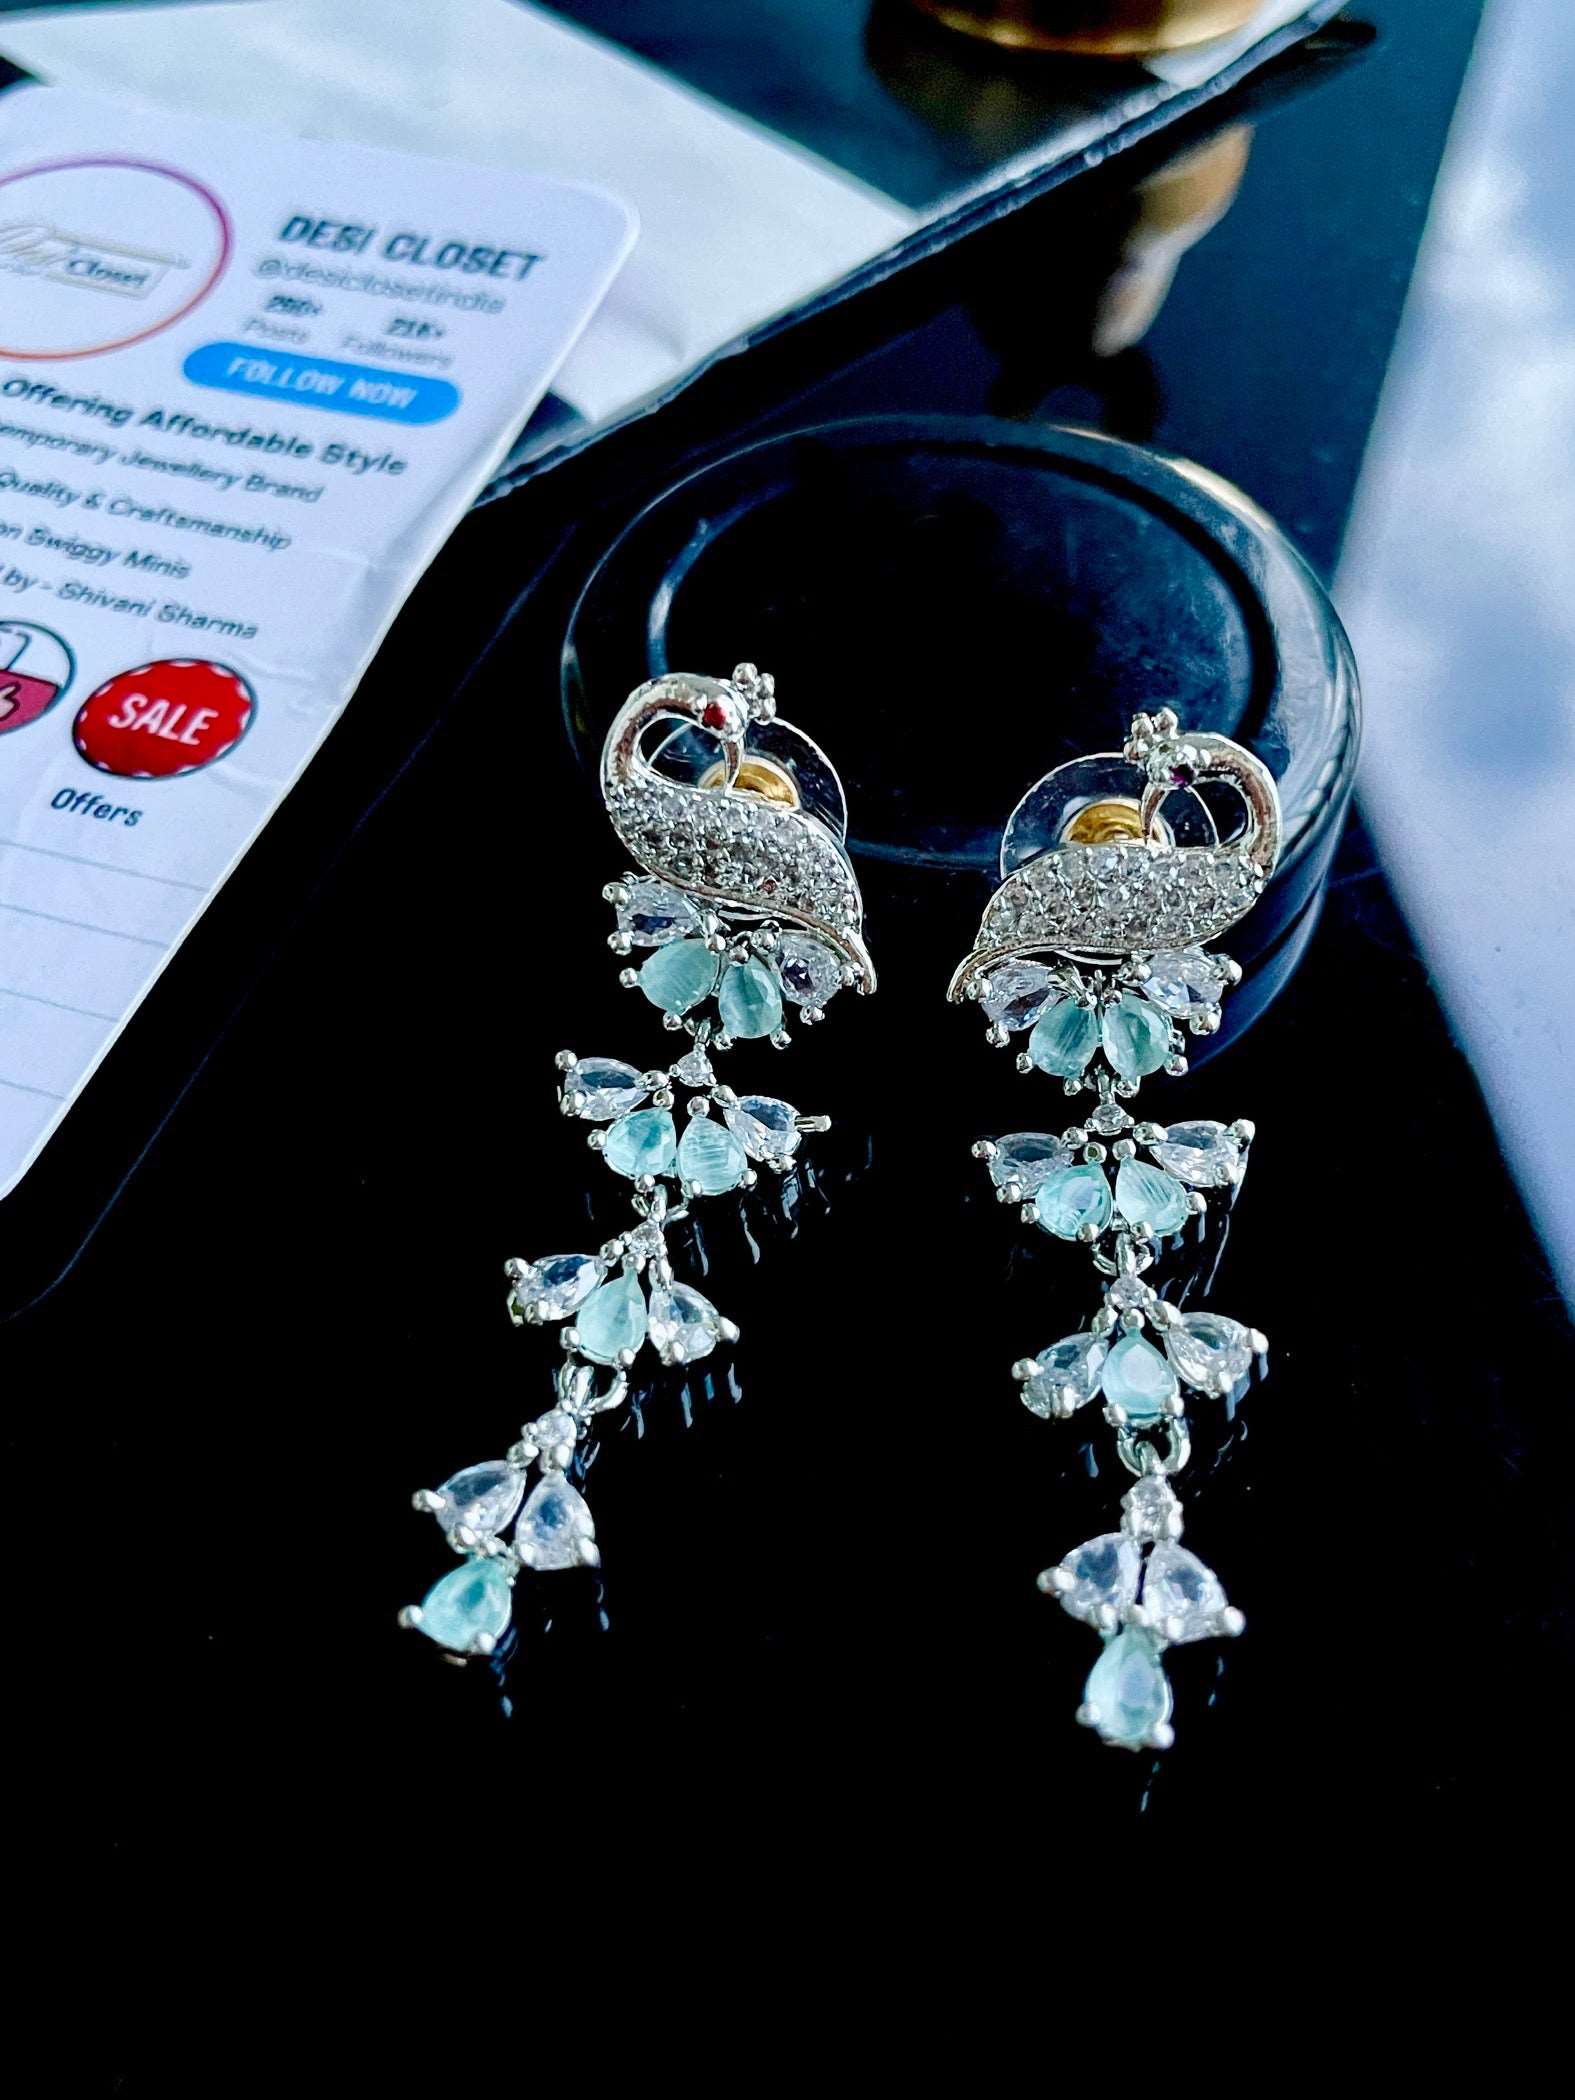 AD Premia Mint Green Peacock Drop Earrings with Ruby Eyes - Desi Closet